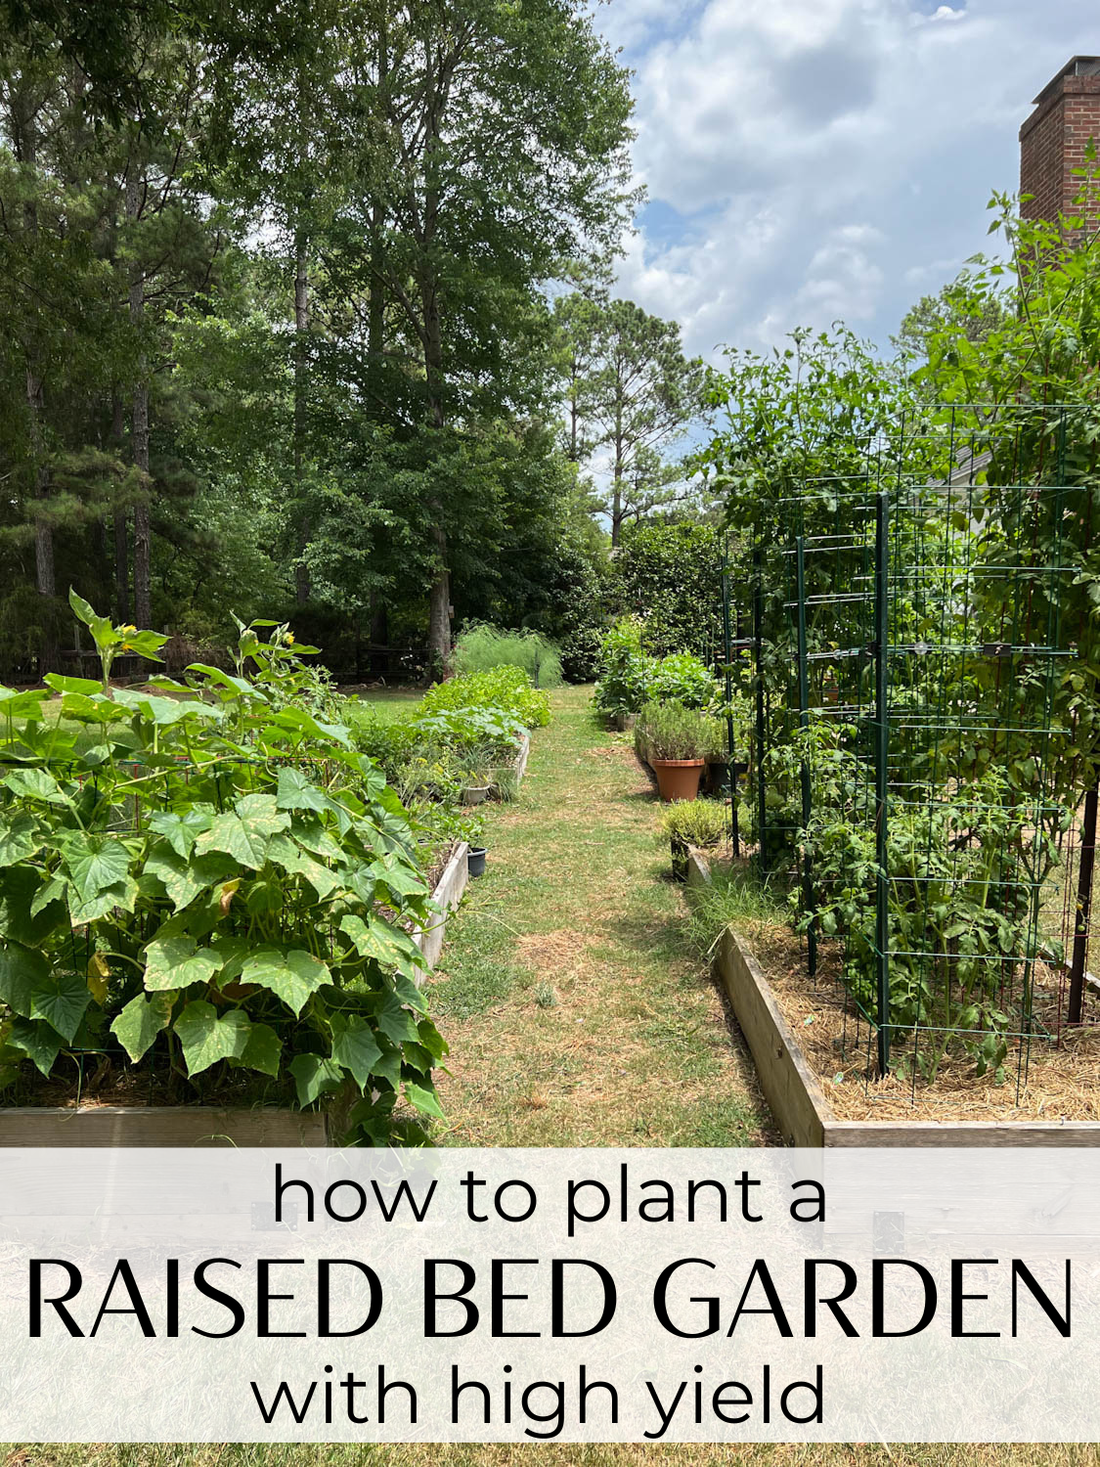 How to Plant a Raised Bed Vegetable Garden with High Yield